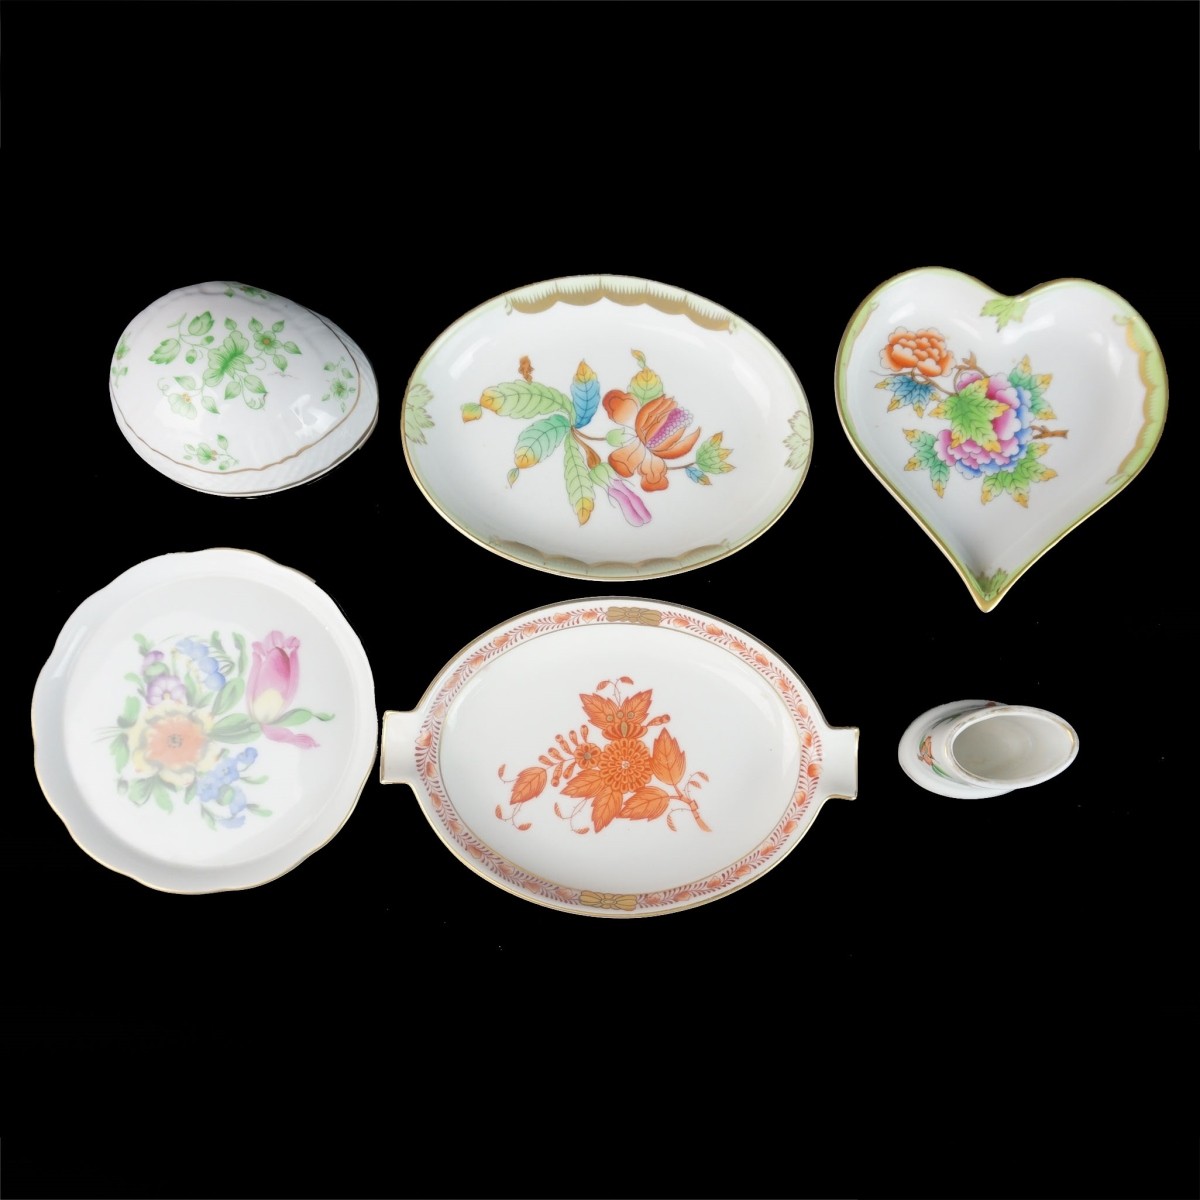 Herend and Hollohaza Porcelain